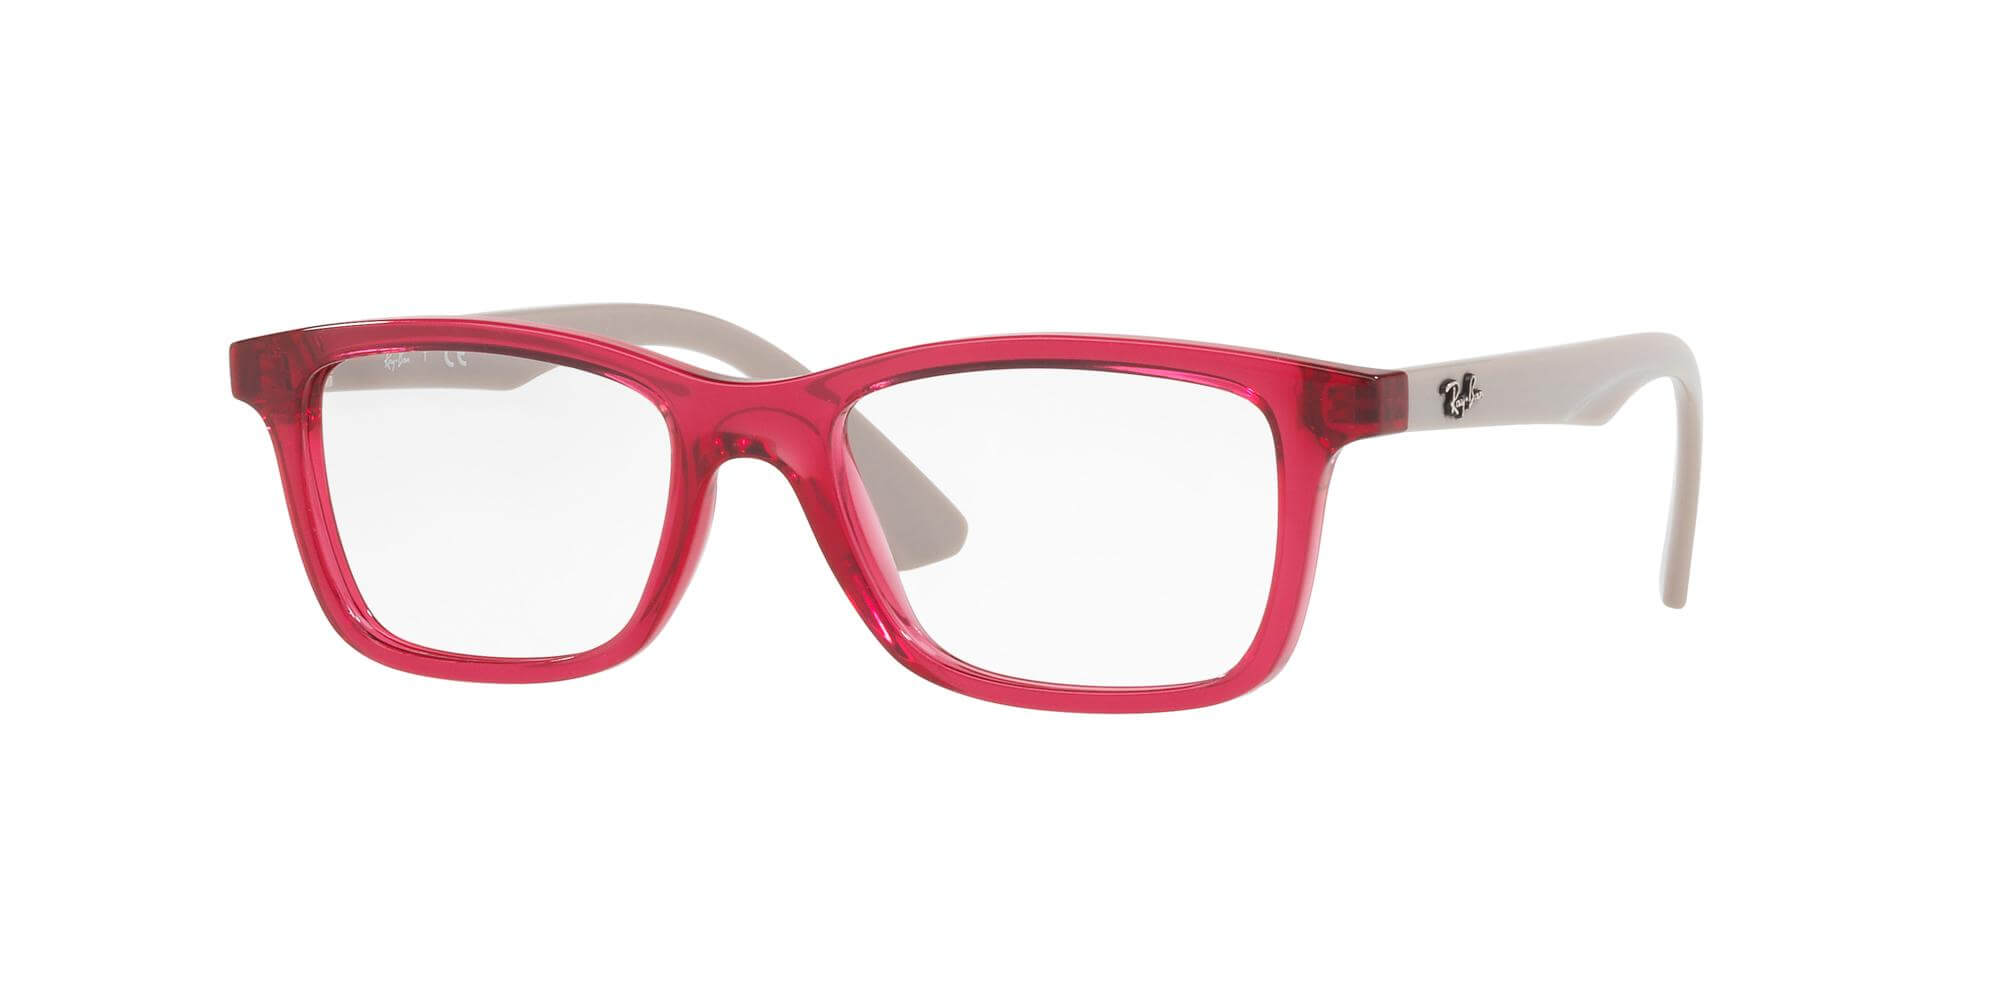 Ray-Ban JuniorRY 1562Red Grey (3747)